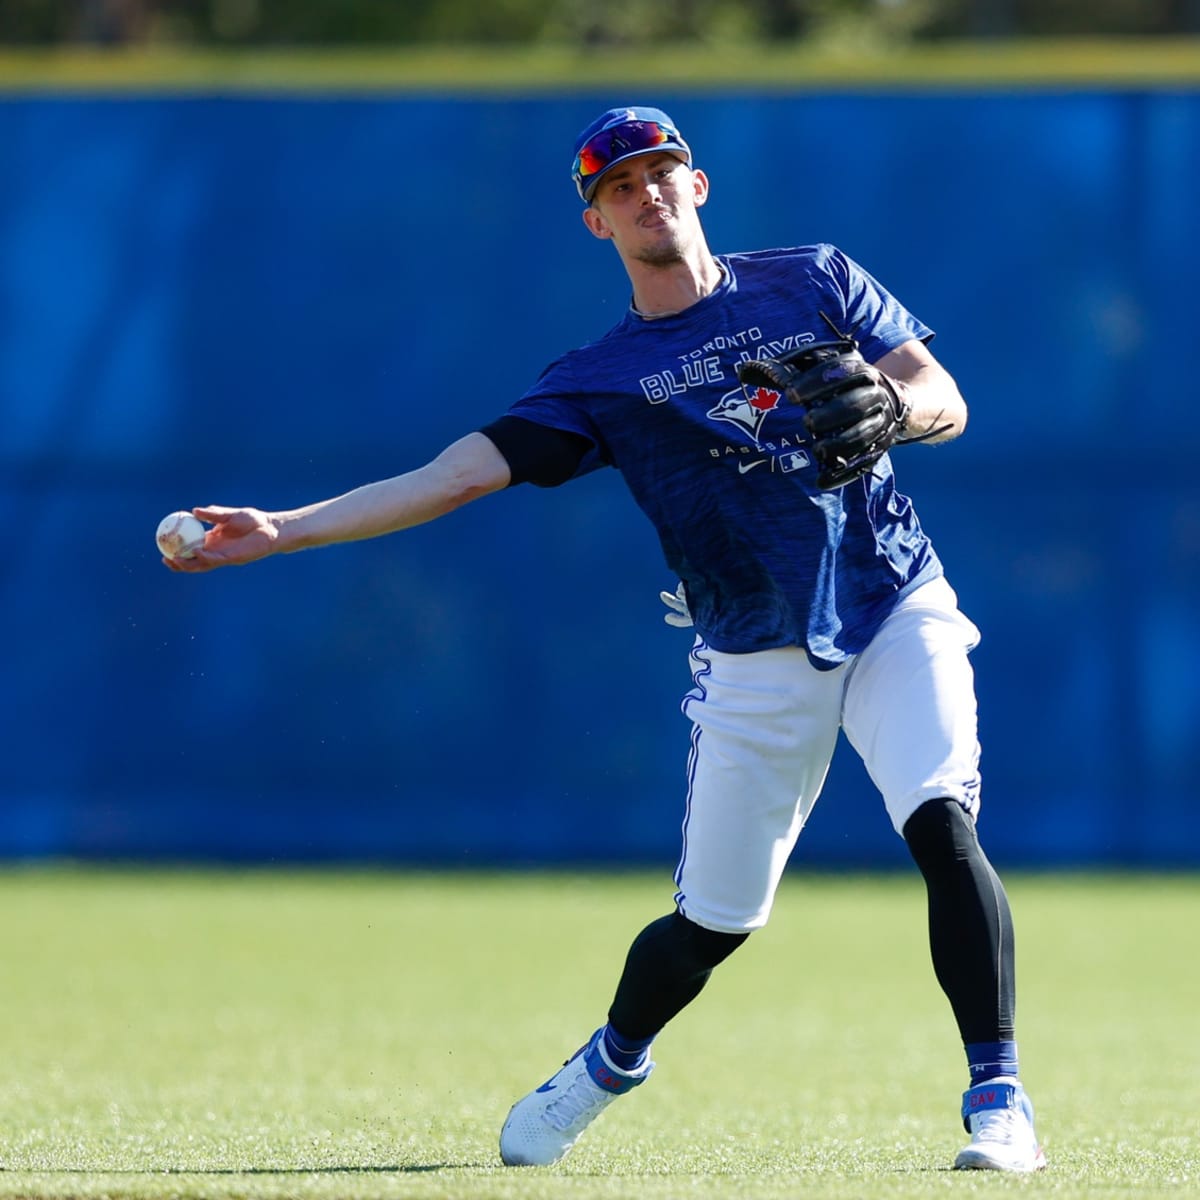 What To Expect From Cavan Biggio In The 2023 Season